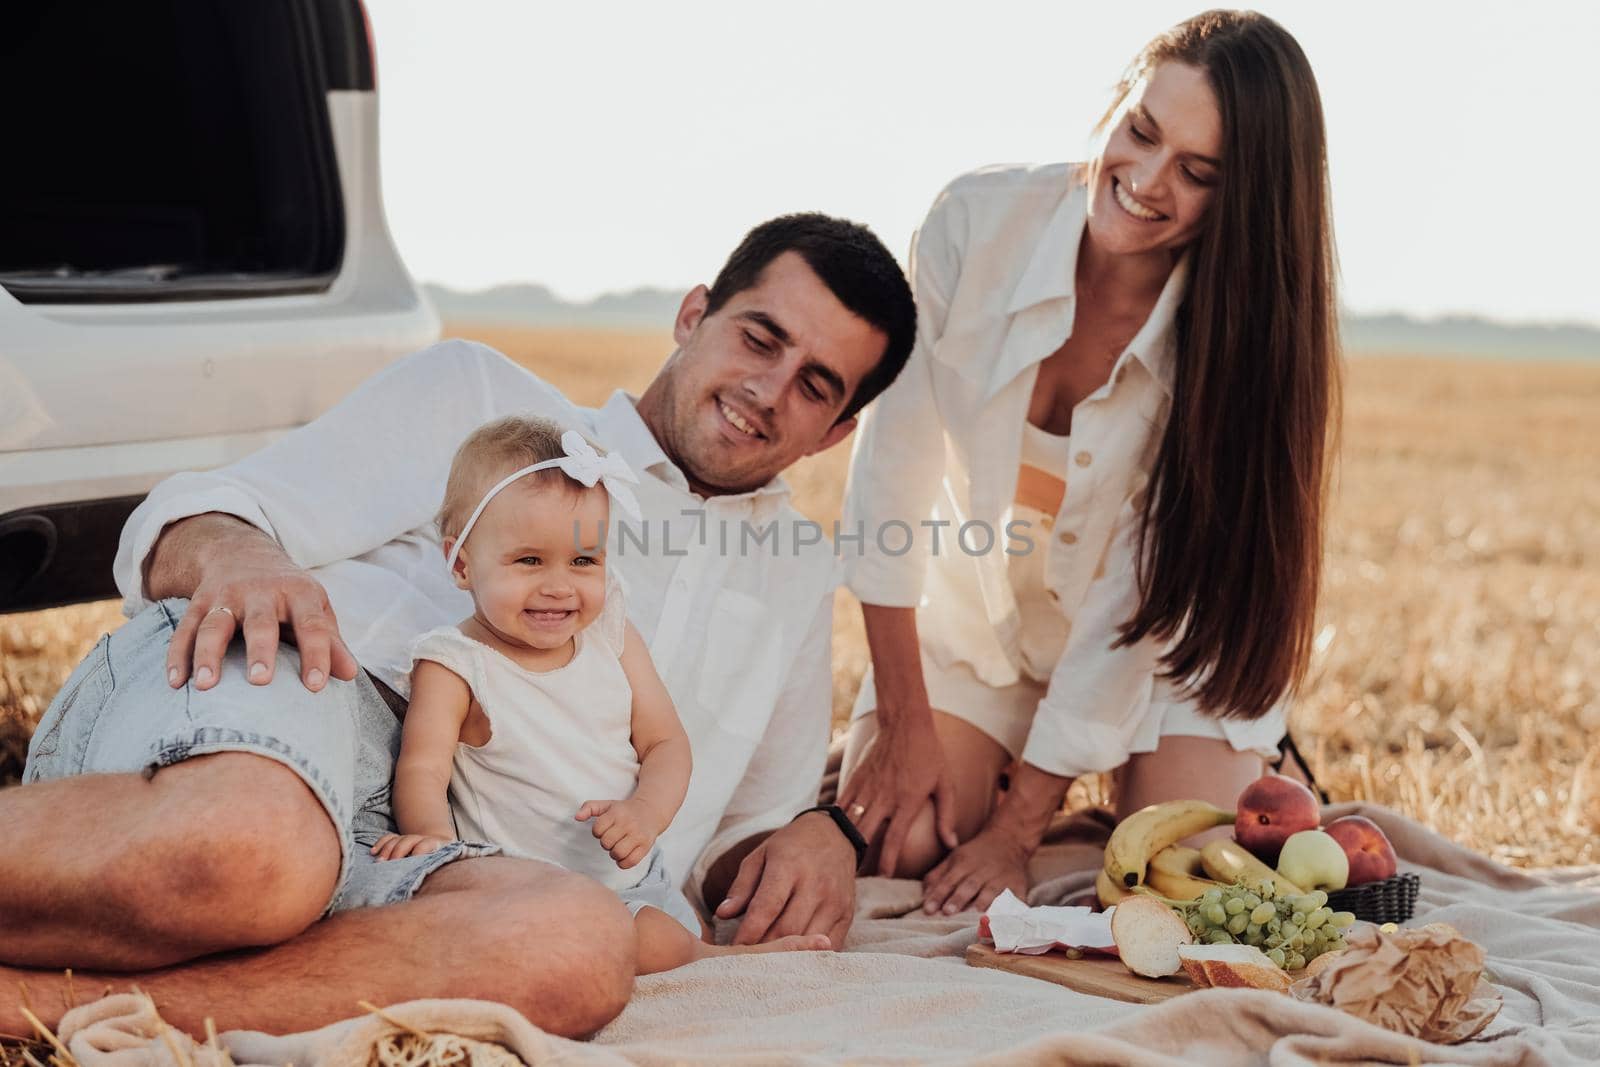 Close Up Portrait of Young Family, Mother and Father with Their Toddler Daughter Having Picnic Time Outdoors During Their Road Trip with Car